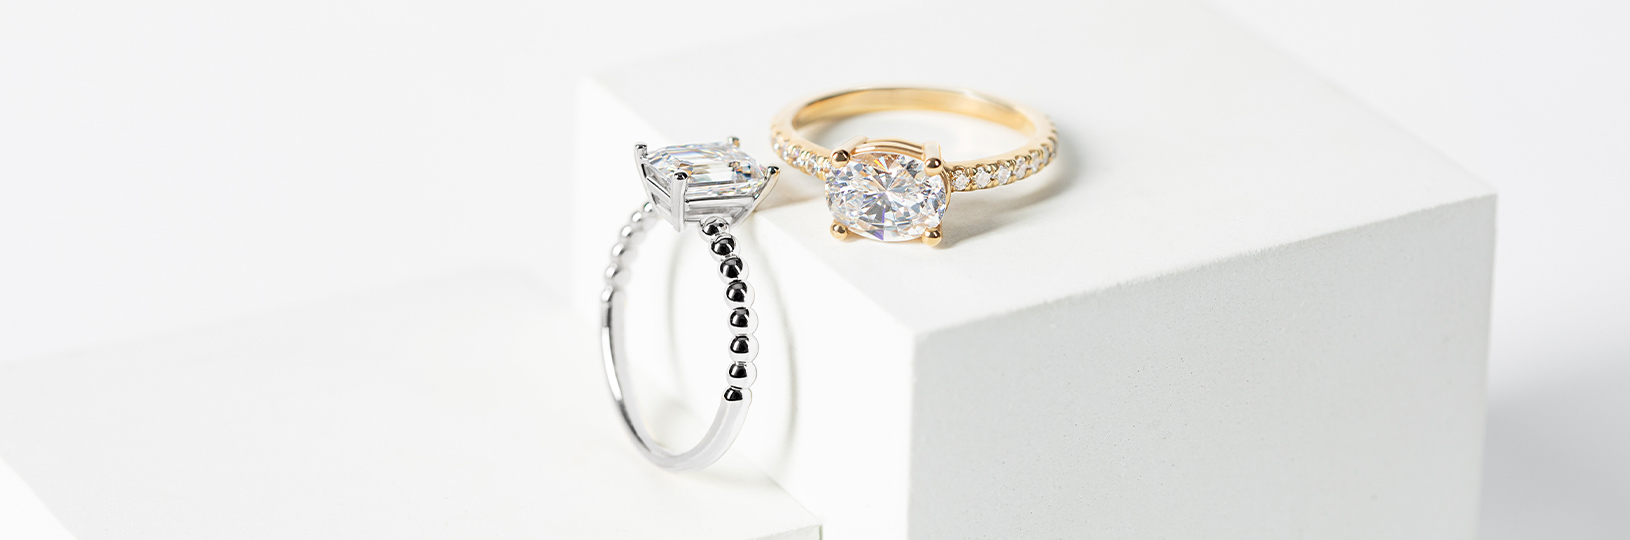 A white gold and a yellow gold engagement ring